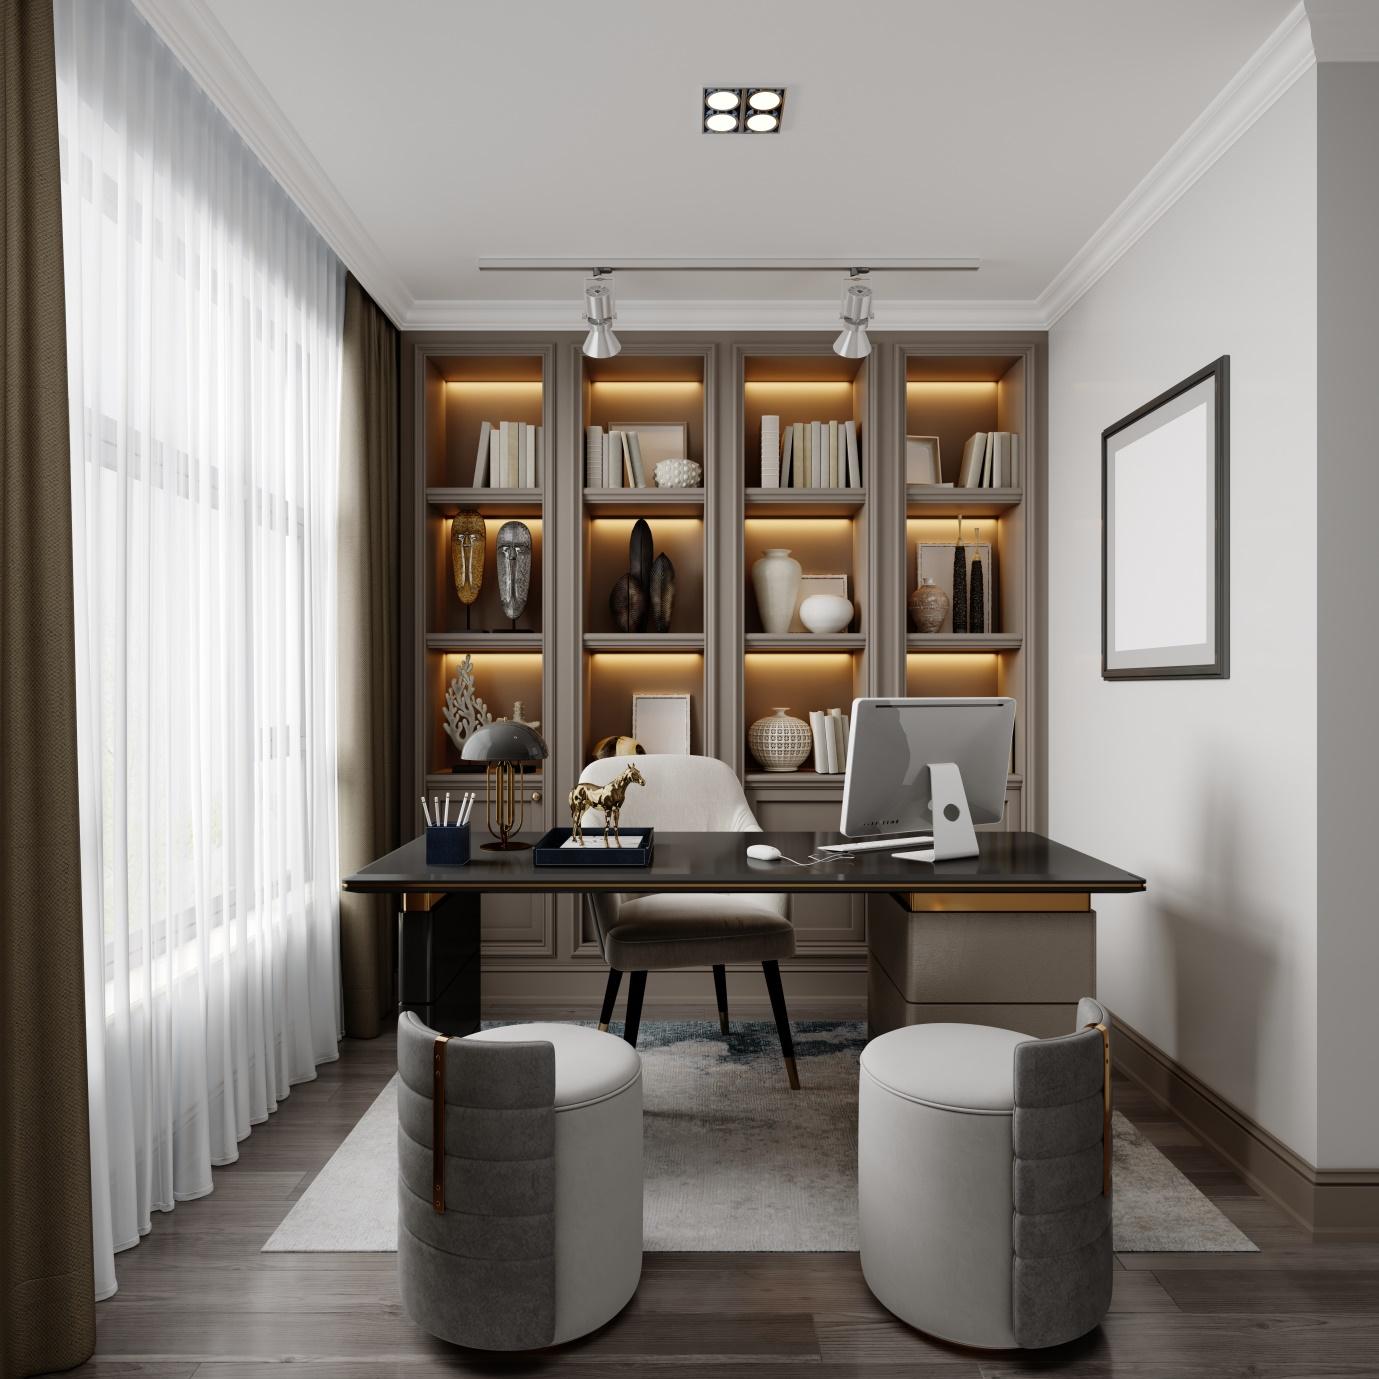 Home office design, an office room with cabinets and table